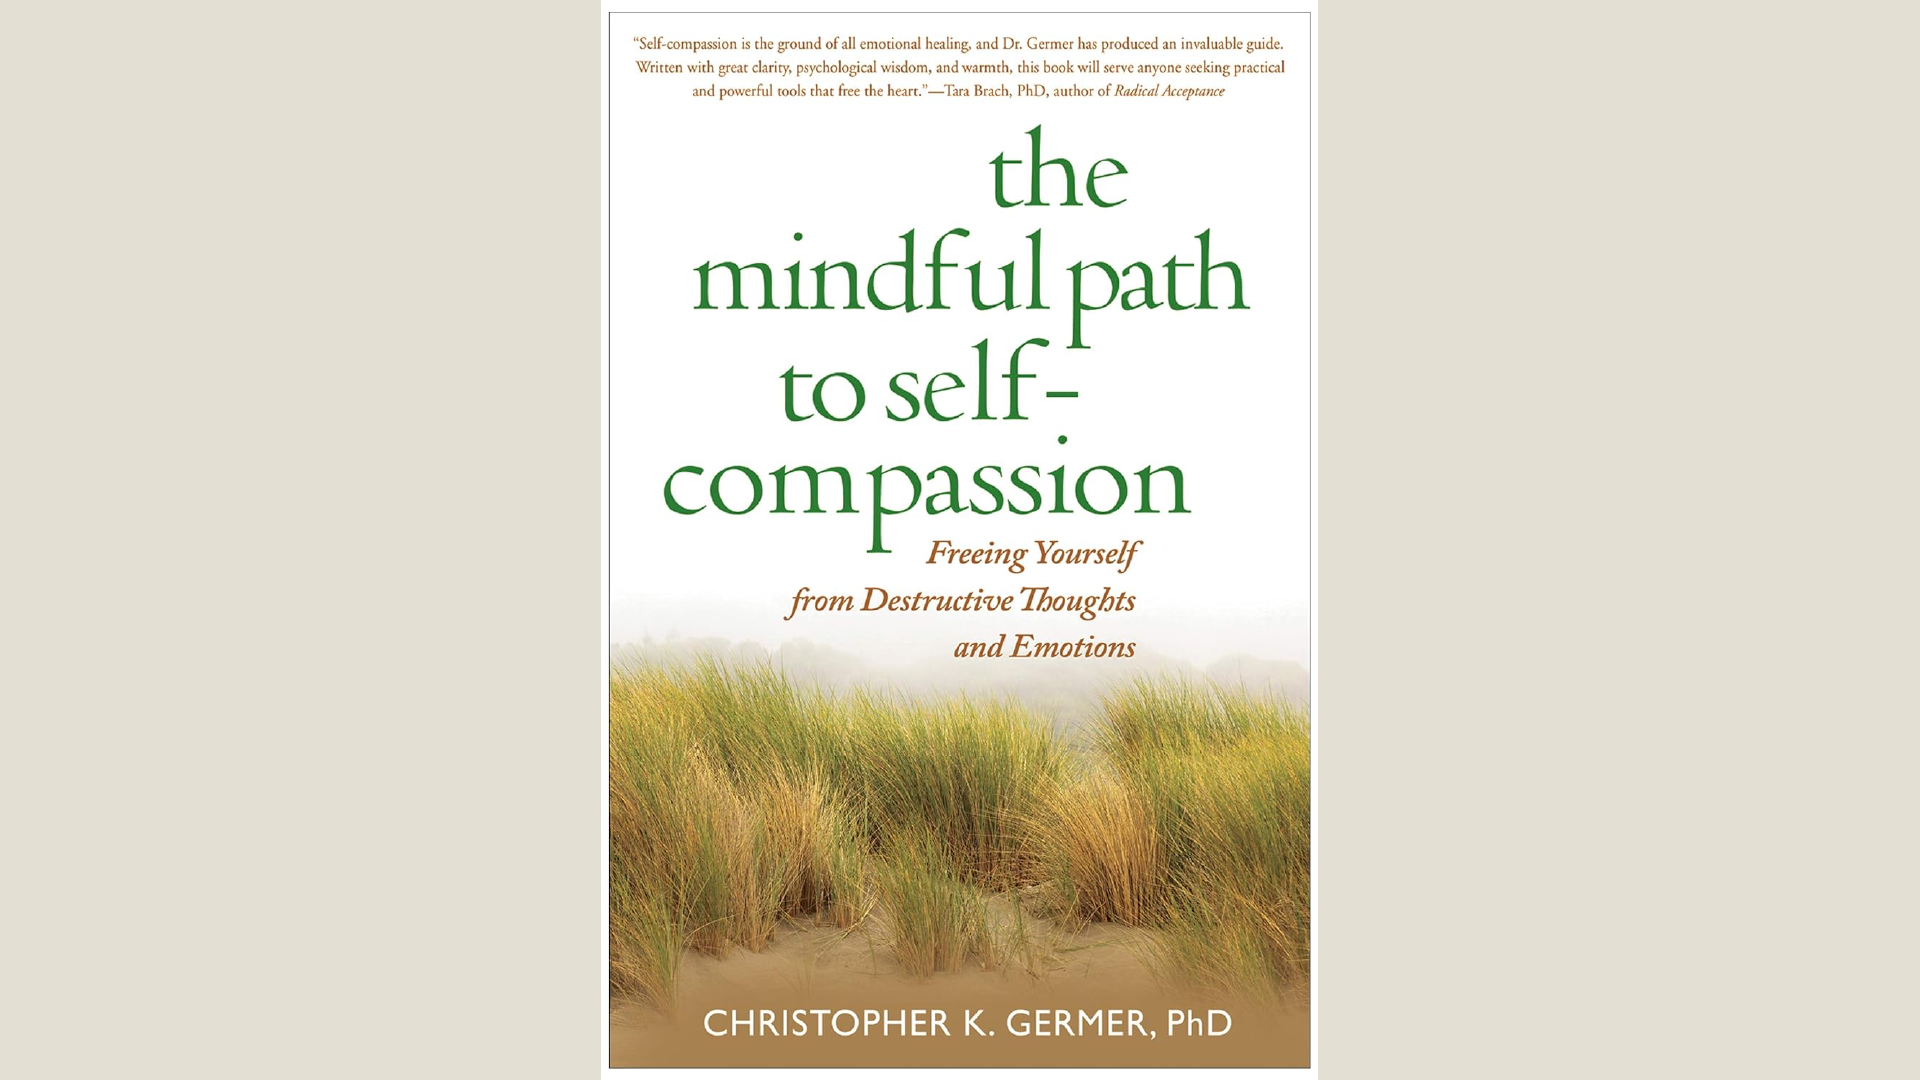 Summary: The Mindful Path to Self-Compassion by Christopher K. Germer, Ph.D